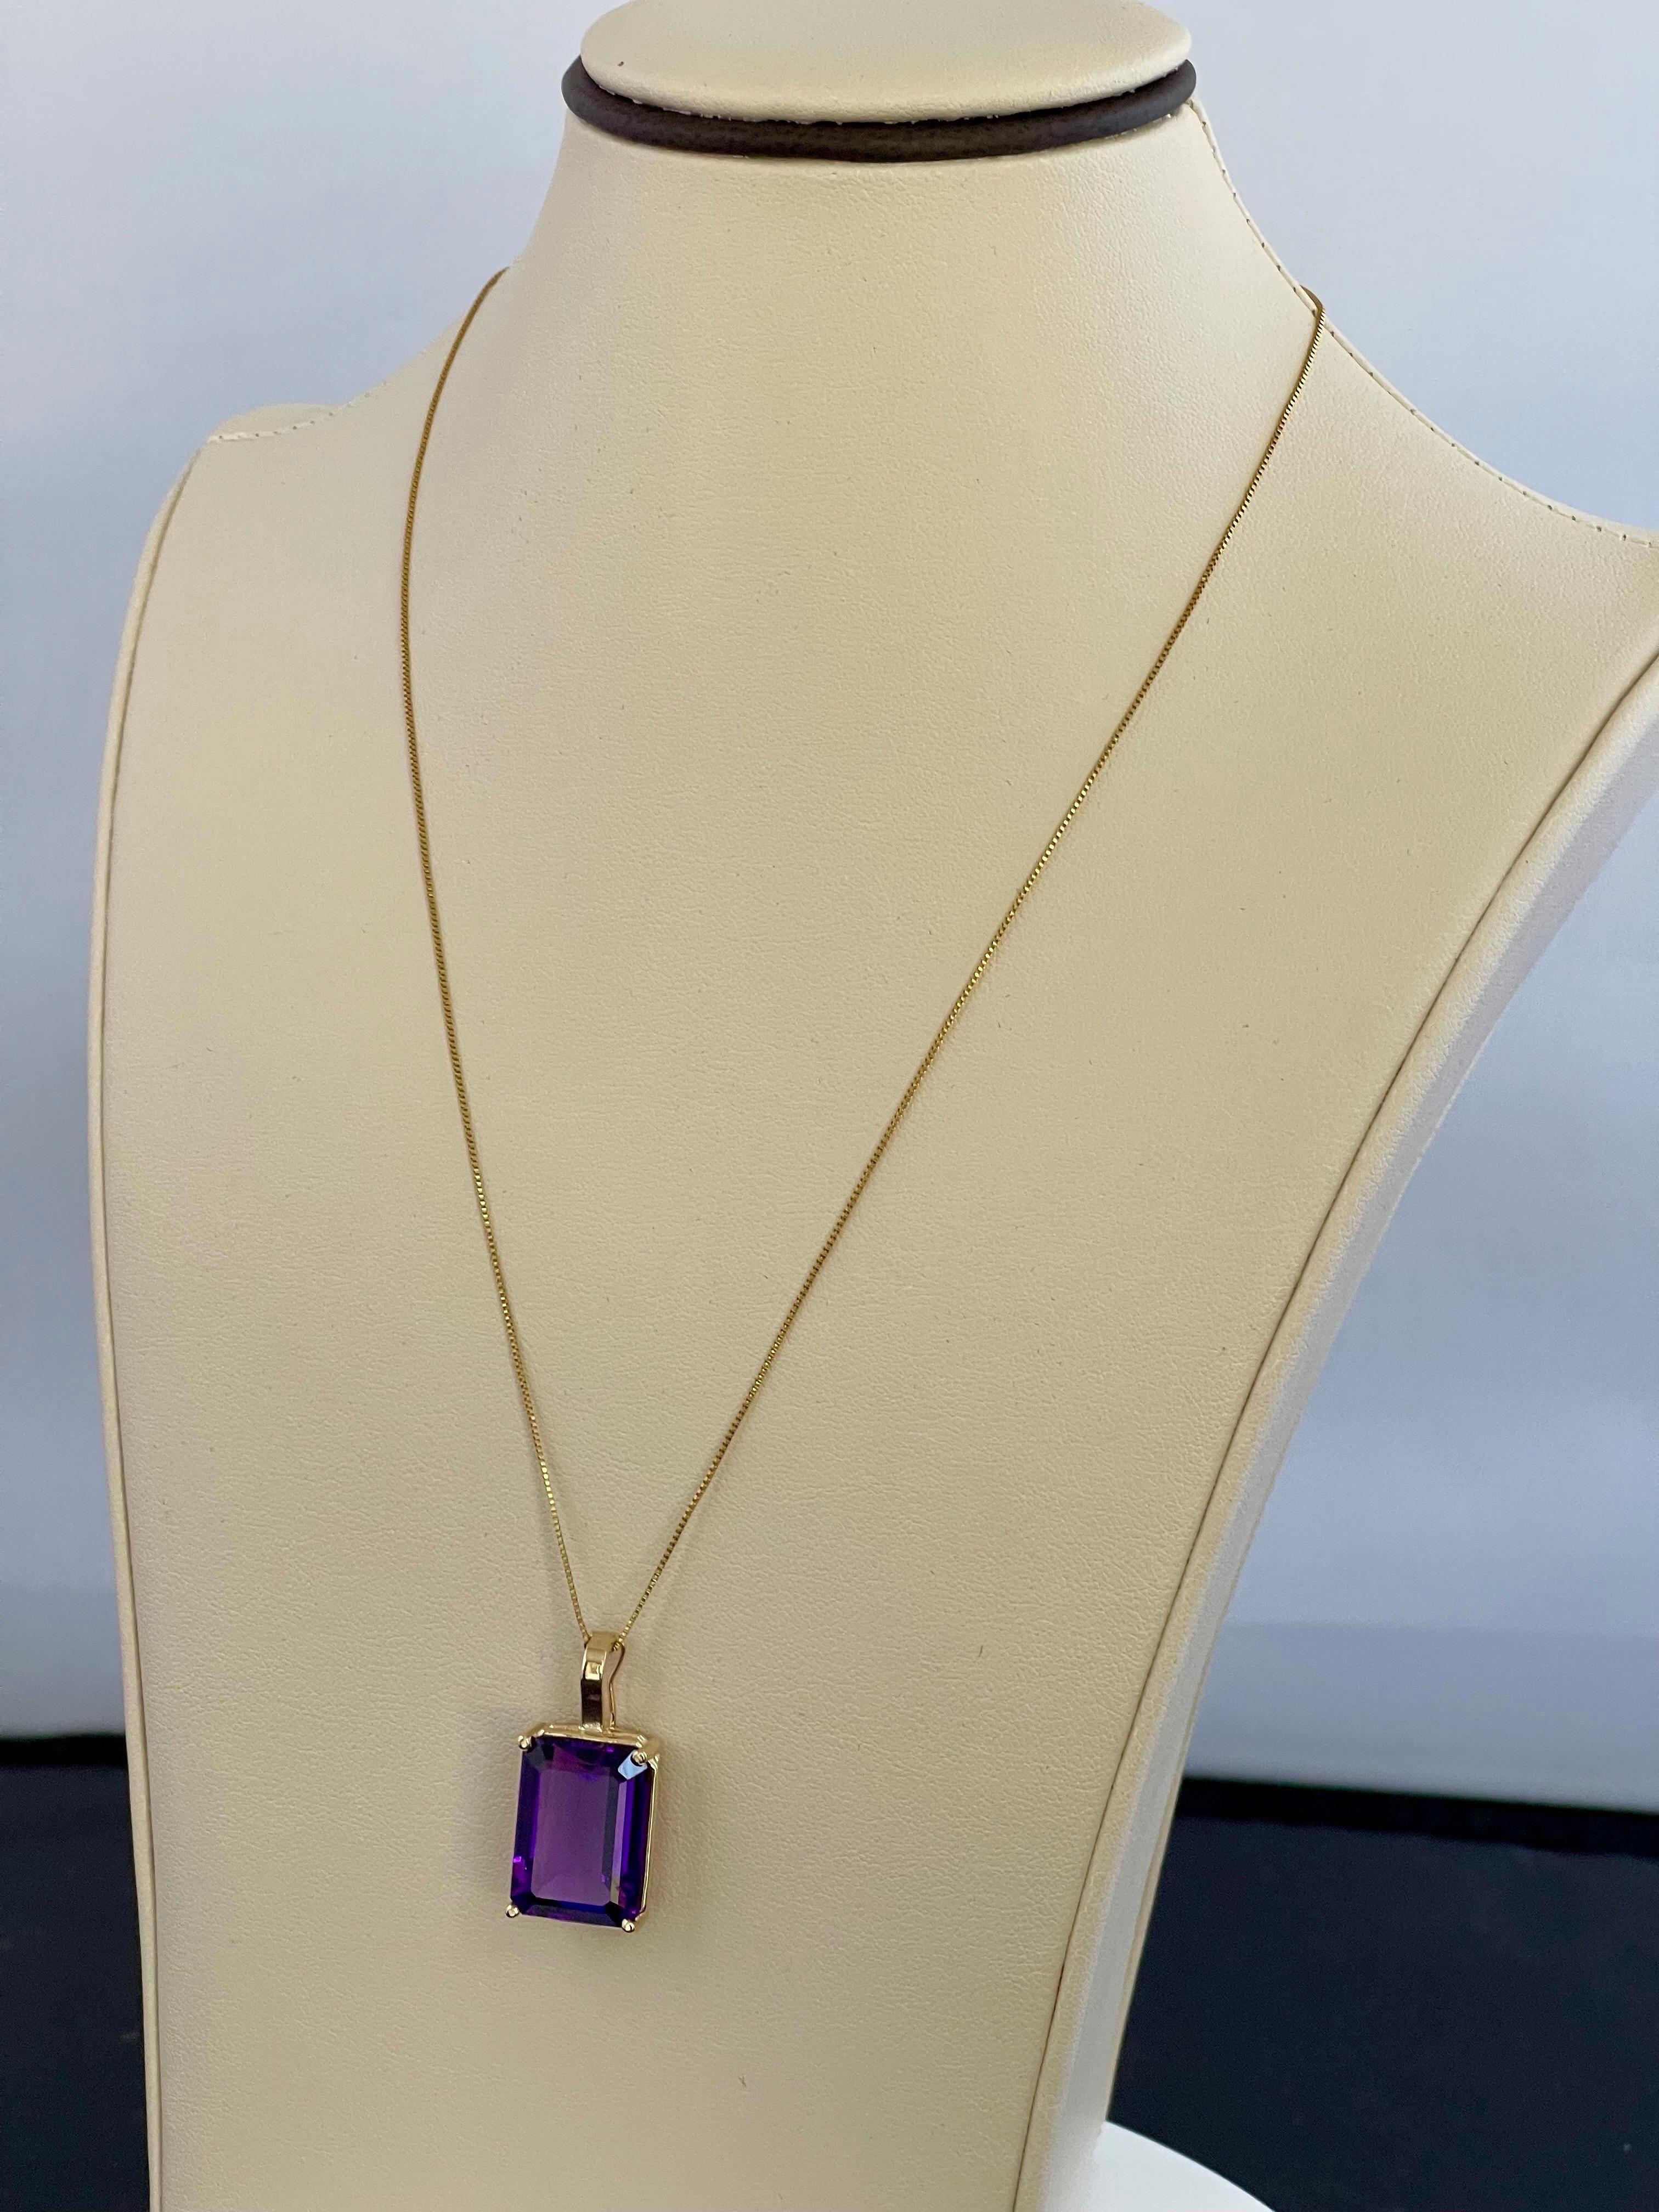 14 Ct Emerald Cut Amethyst Pendant/Neck 18Kt  Gold + 14 Kt Yellow Gold Chain In Excellent Condition For Sale In New York, NY